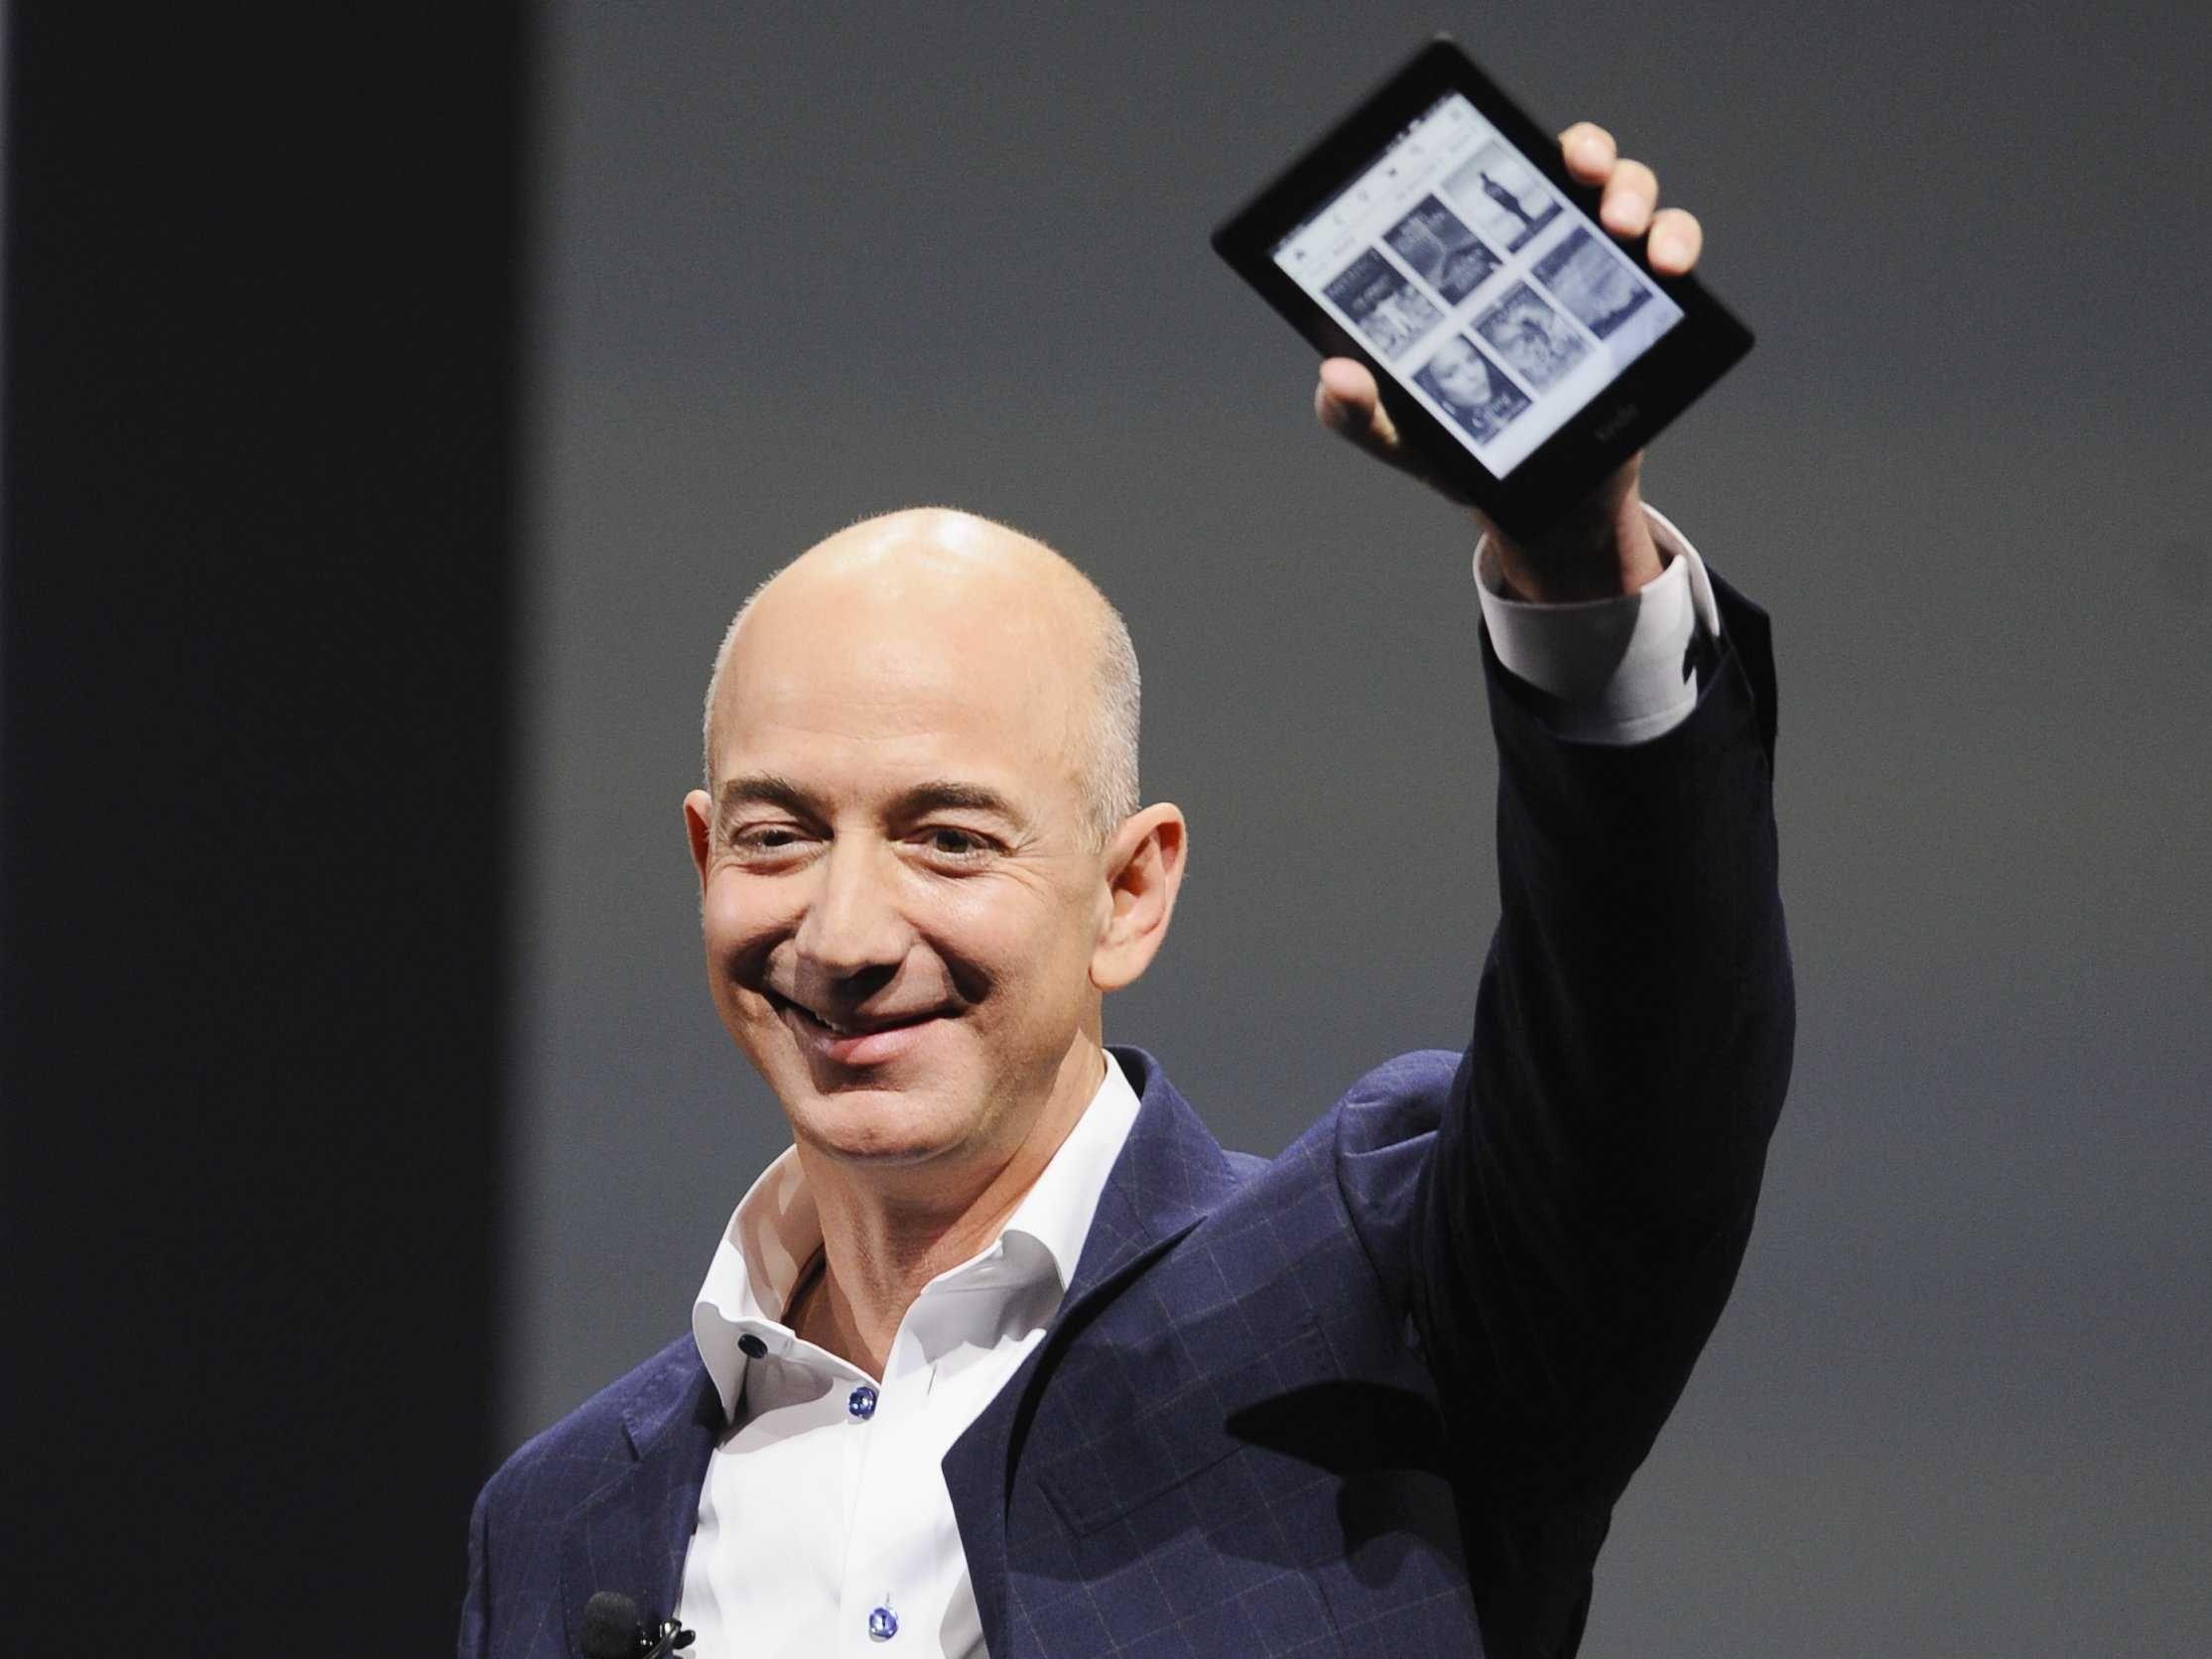 Are you looking for Jeff Bezos wallpaper and fed up with your dull